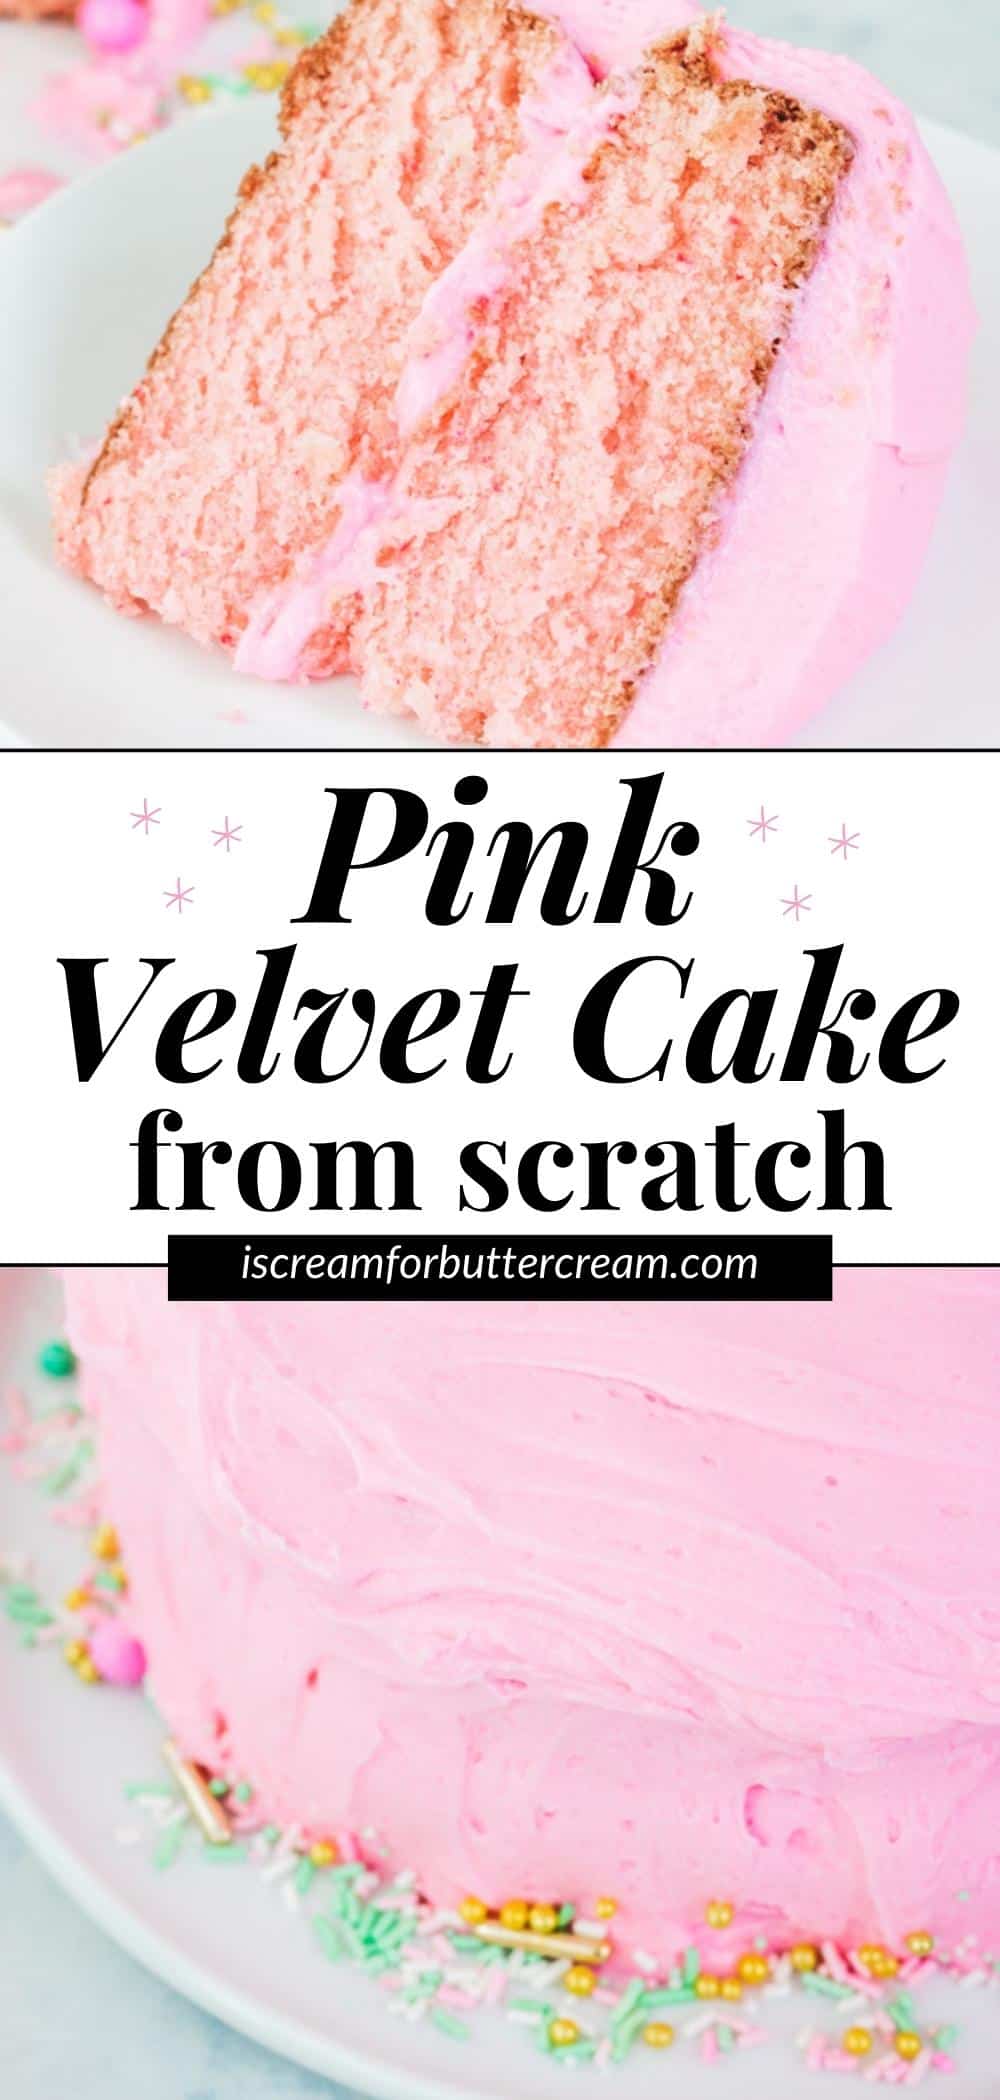 Pinterest graphic with two images of pink velvet cake with text overlay.